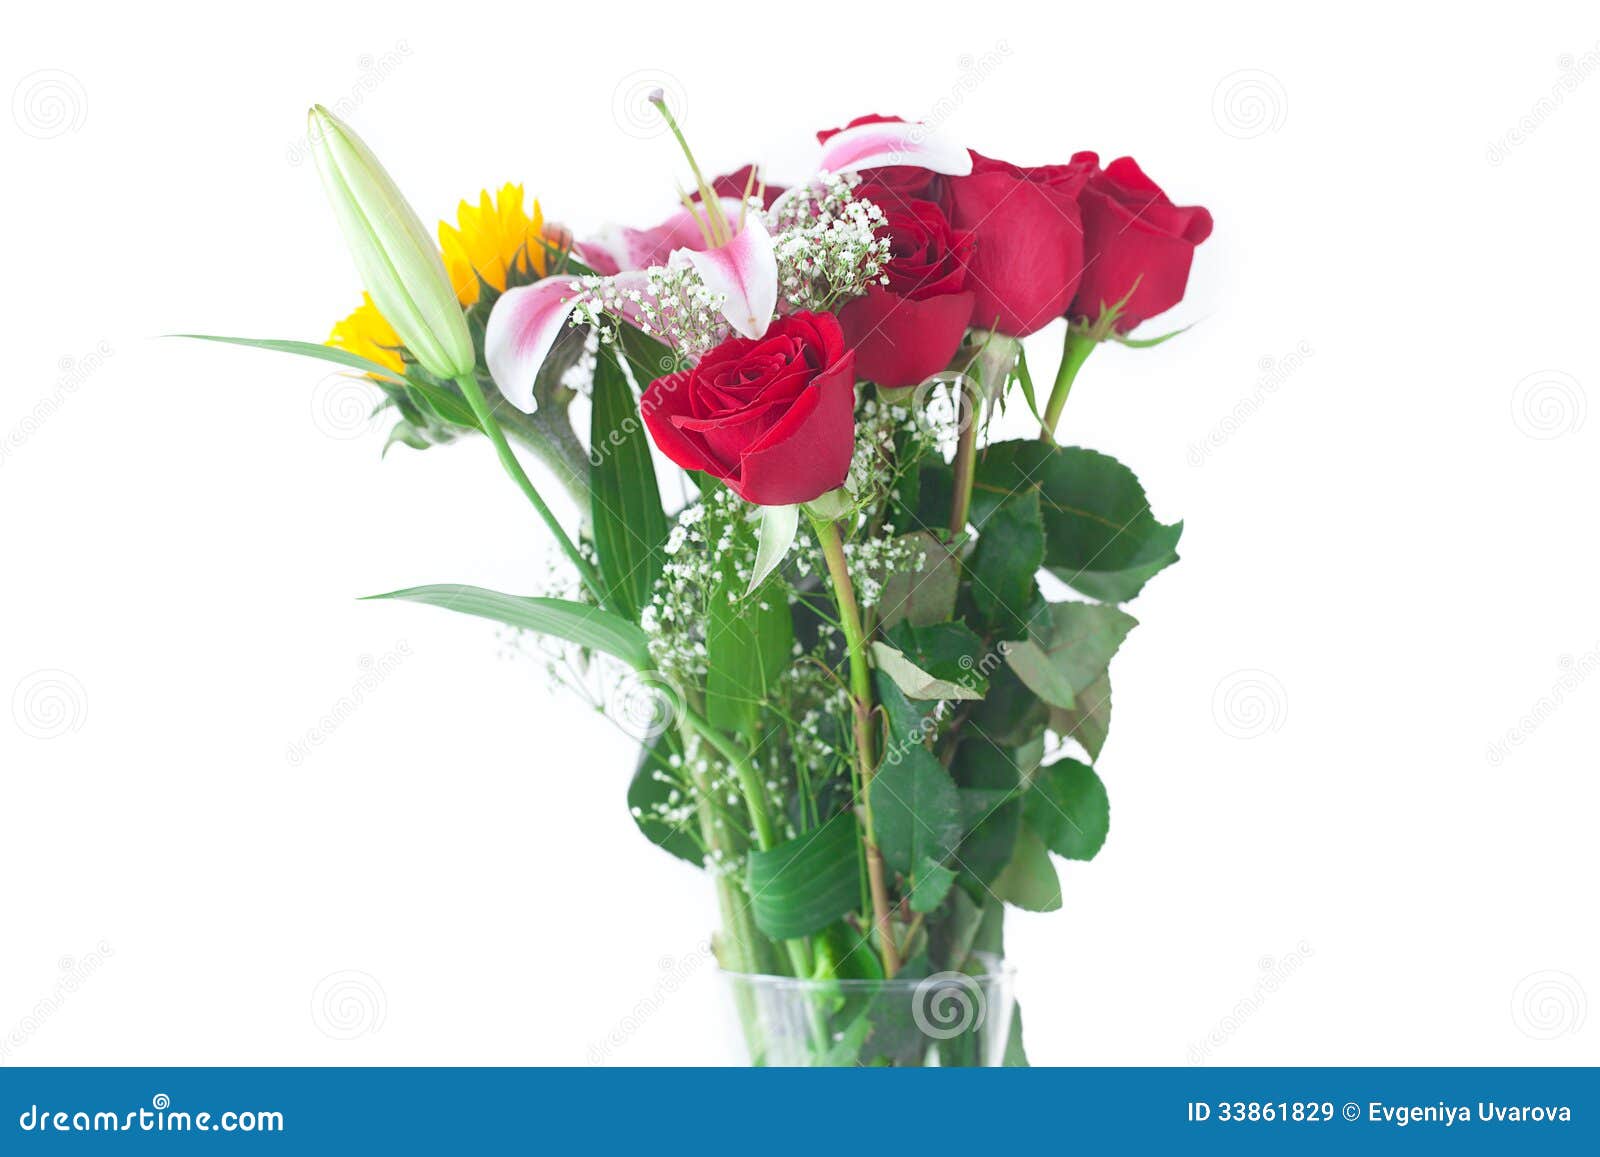 Bouquet Of Sunflowers, Lily And Roses In A Vase Royalty Free Stock ...